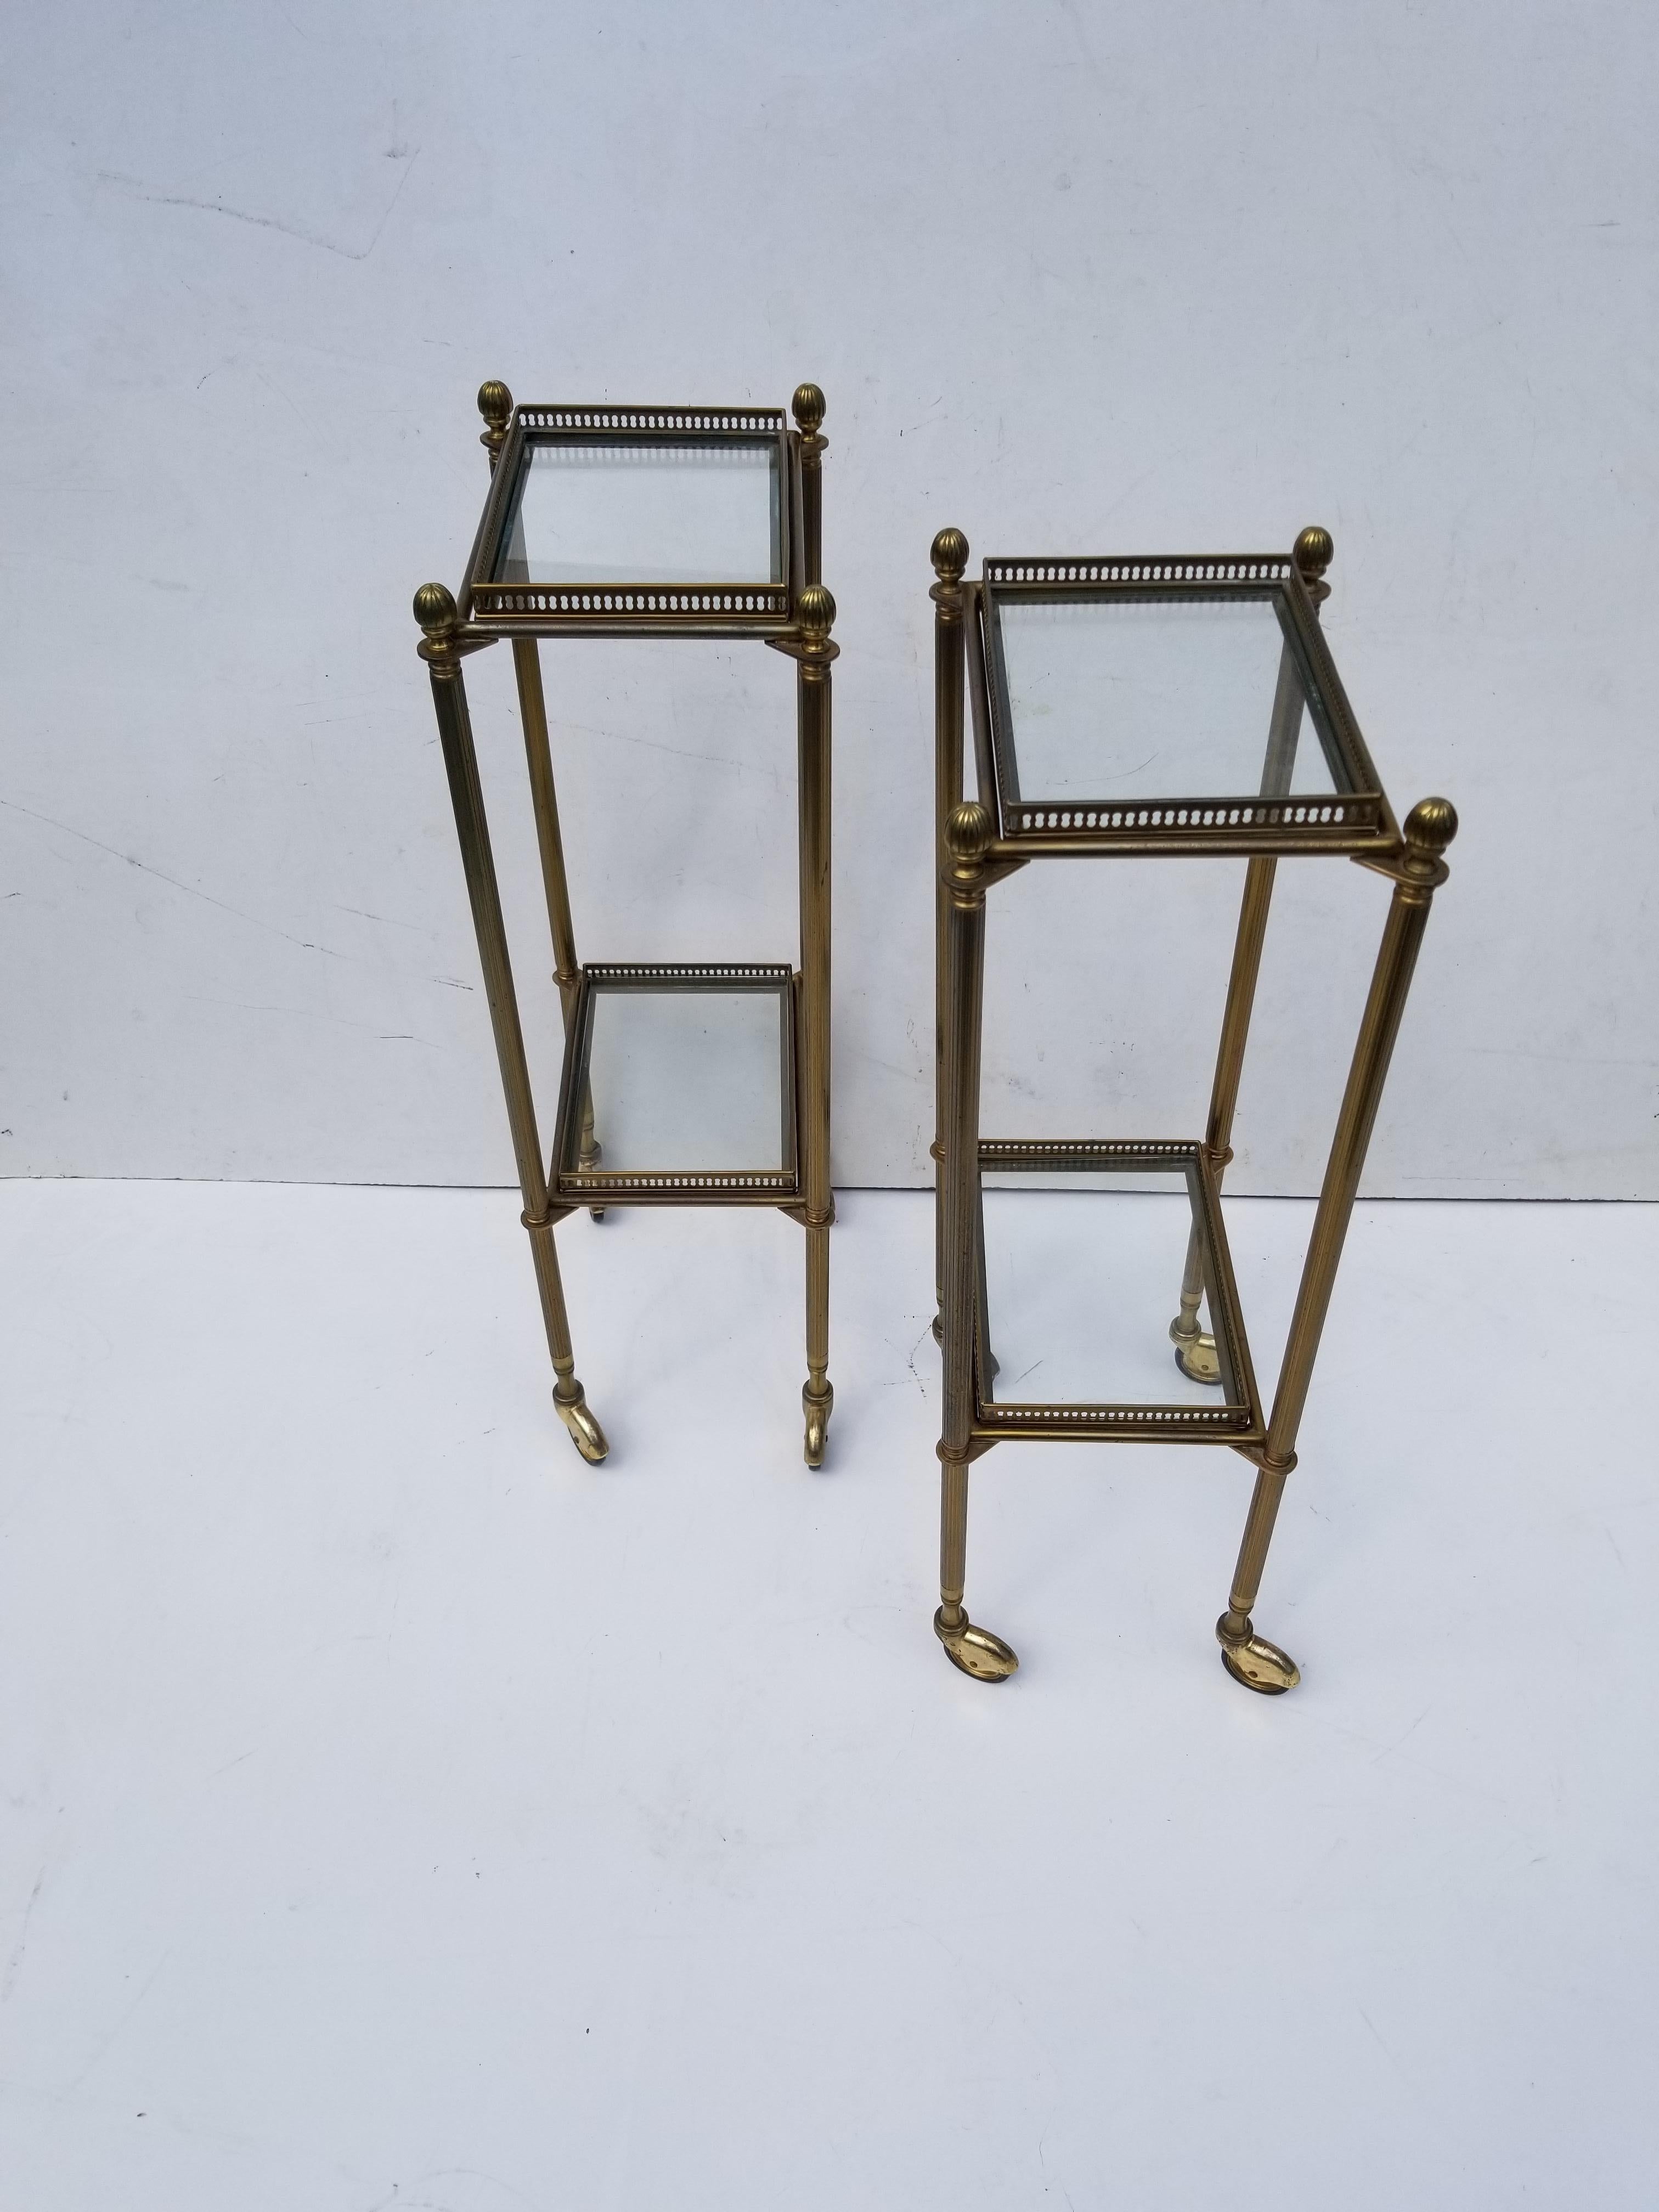 Pair of brass and bronze Maison Baguès, 2 tiers, removable trays
Solid, heavy and sturdy, on wheel.
Very good vintage condition.